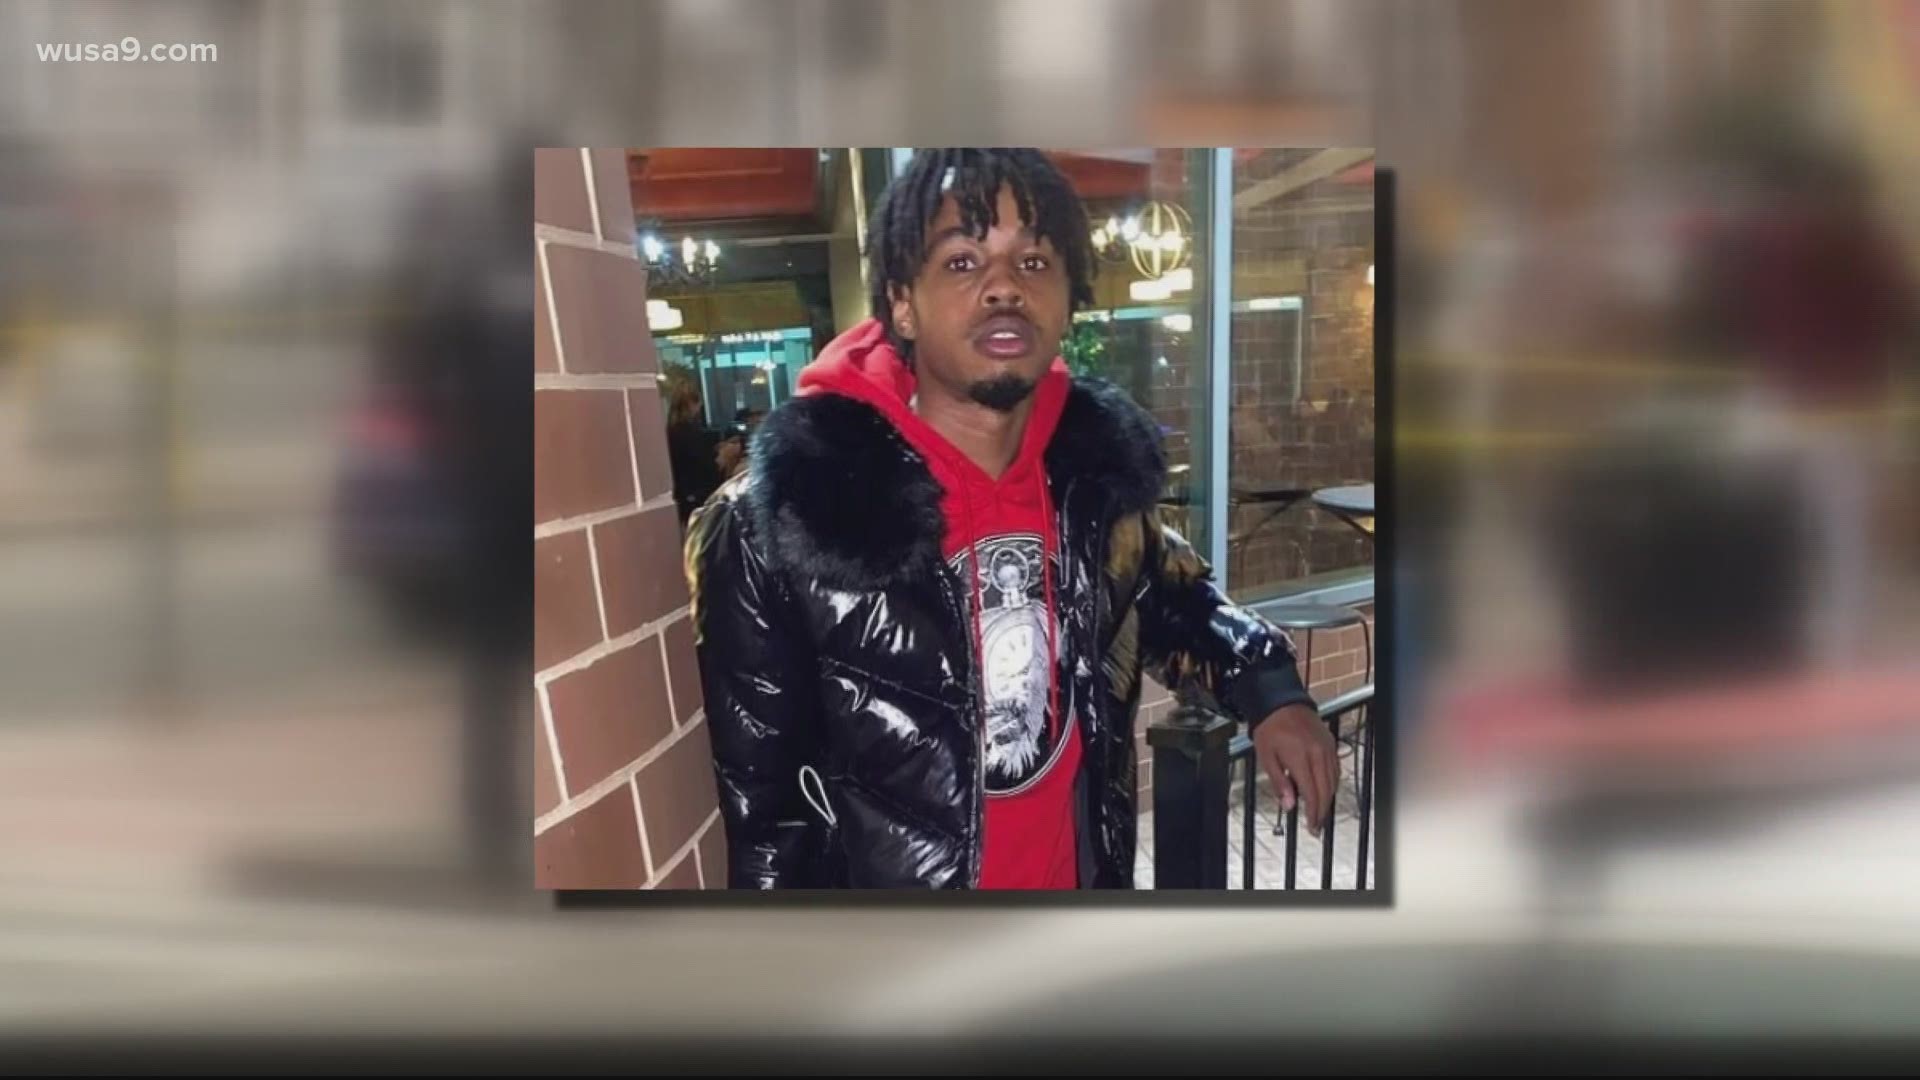 A college senior visiting family was killed in a shooting inside a DC market, while his mom waited in the car. Police need help to find his killers.